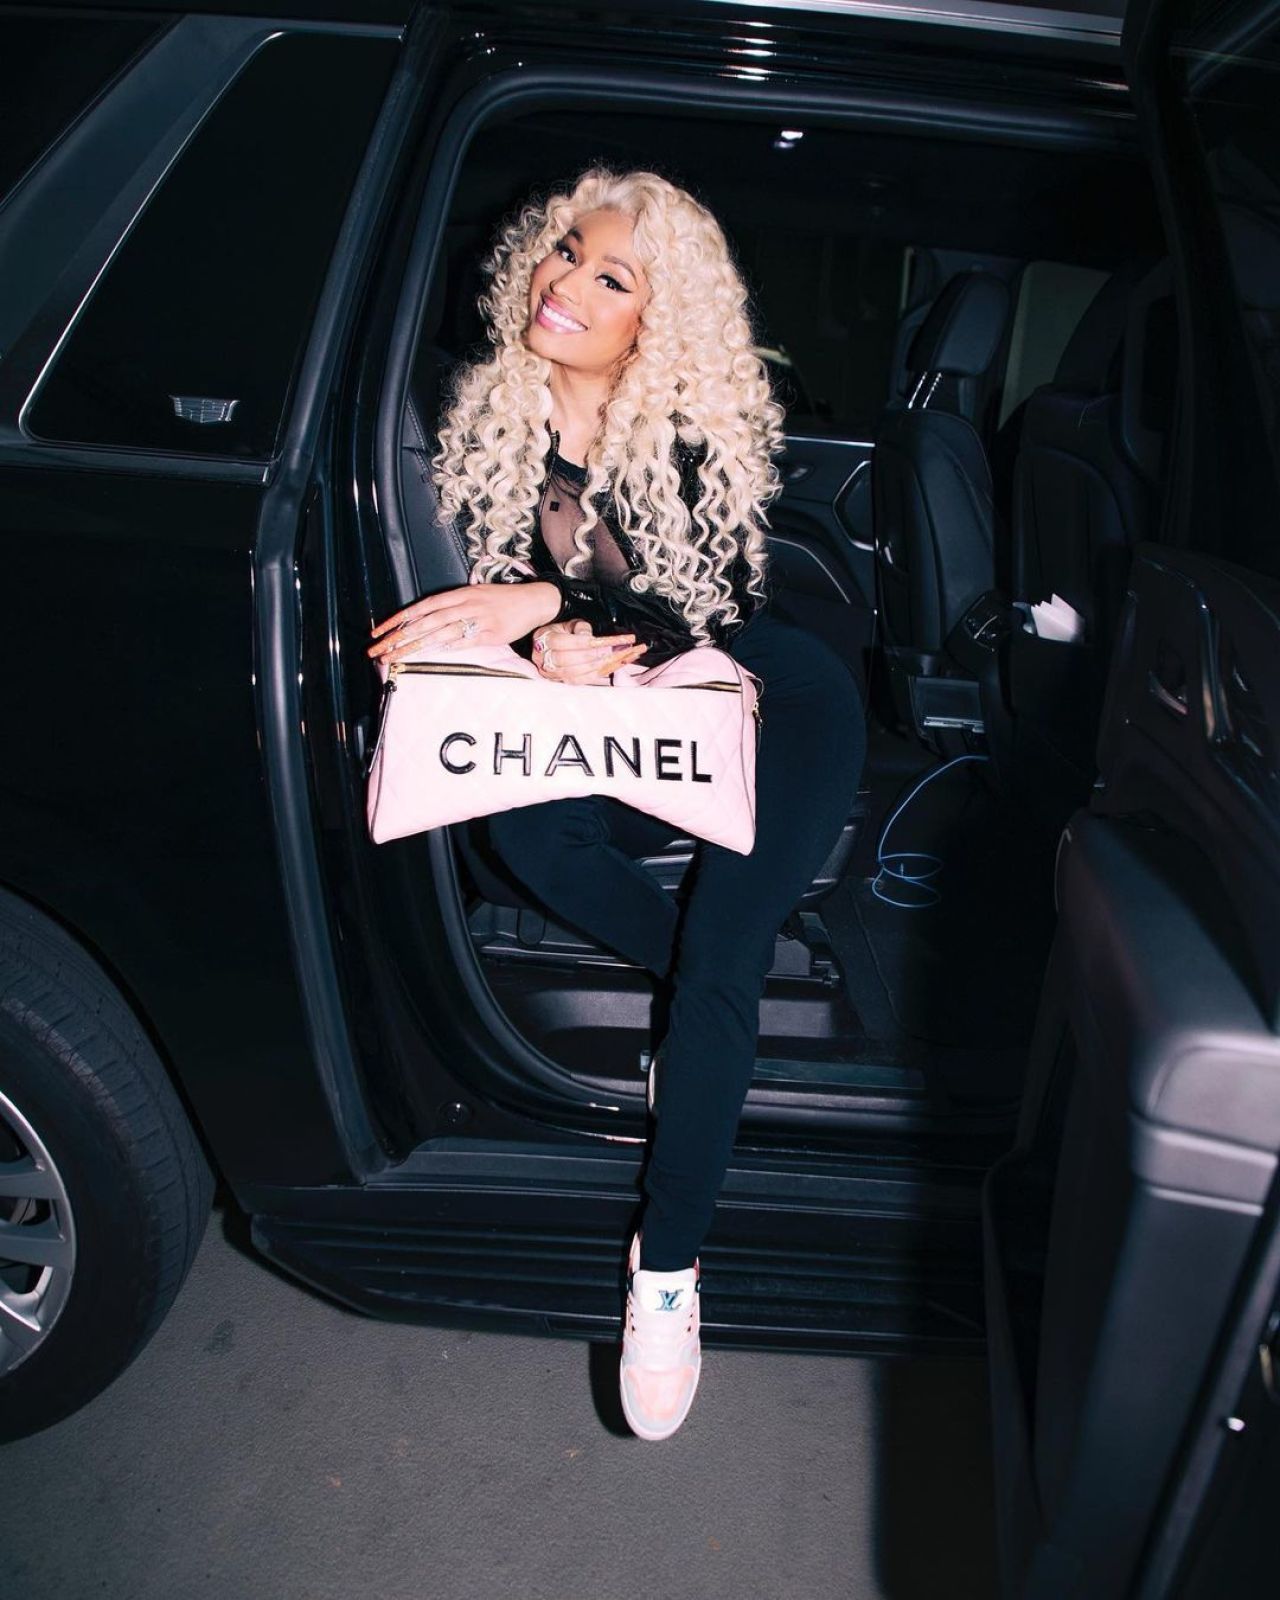 Nicki Minaj spotted in black outfit with CHANEL bag 3